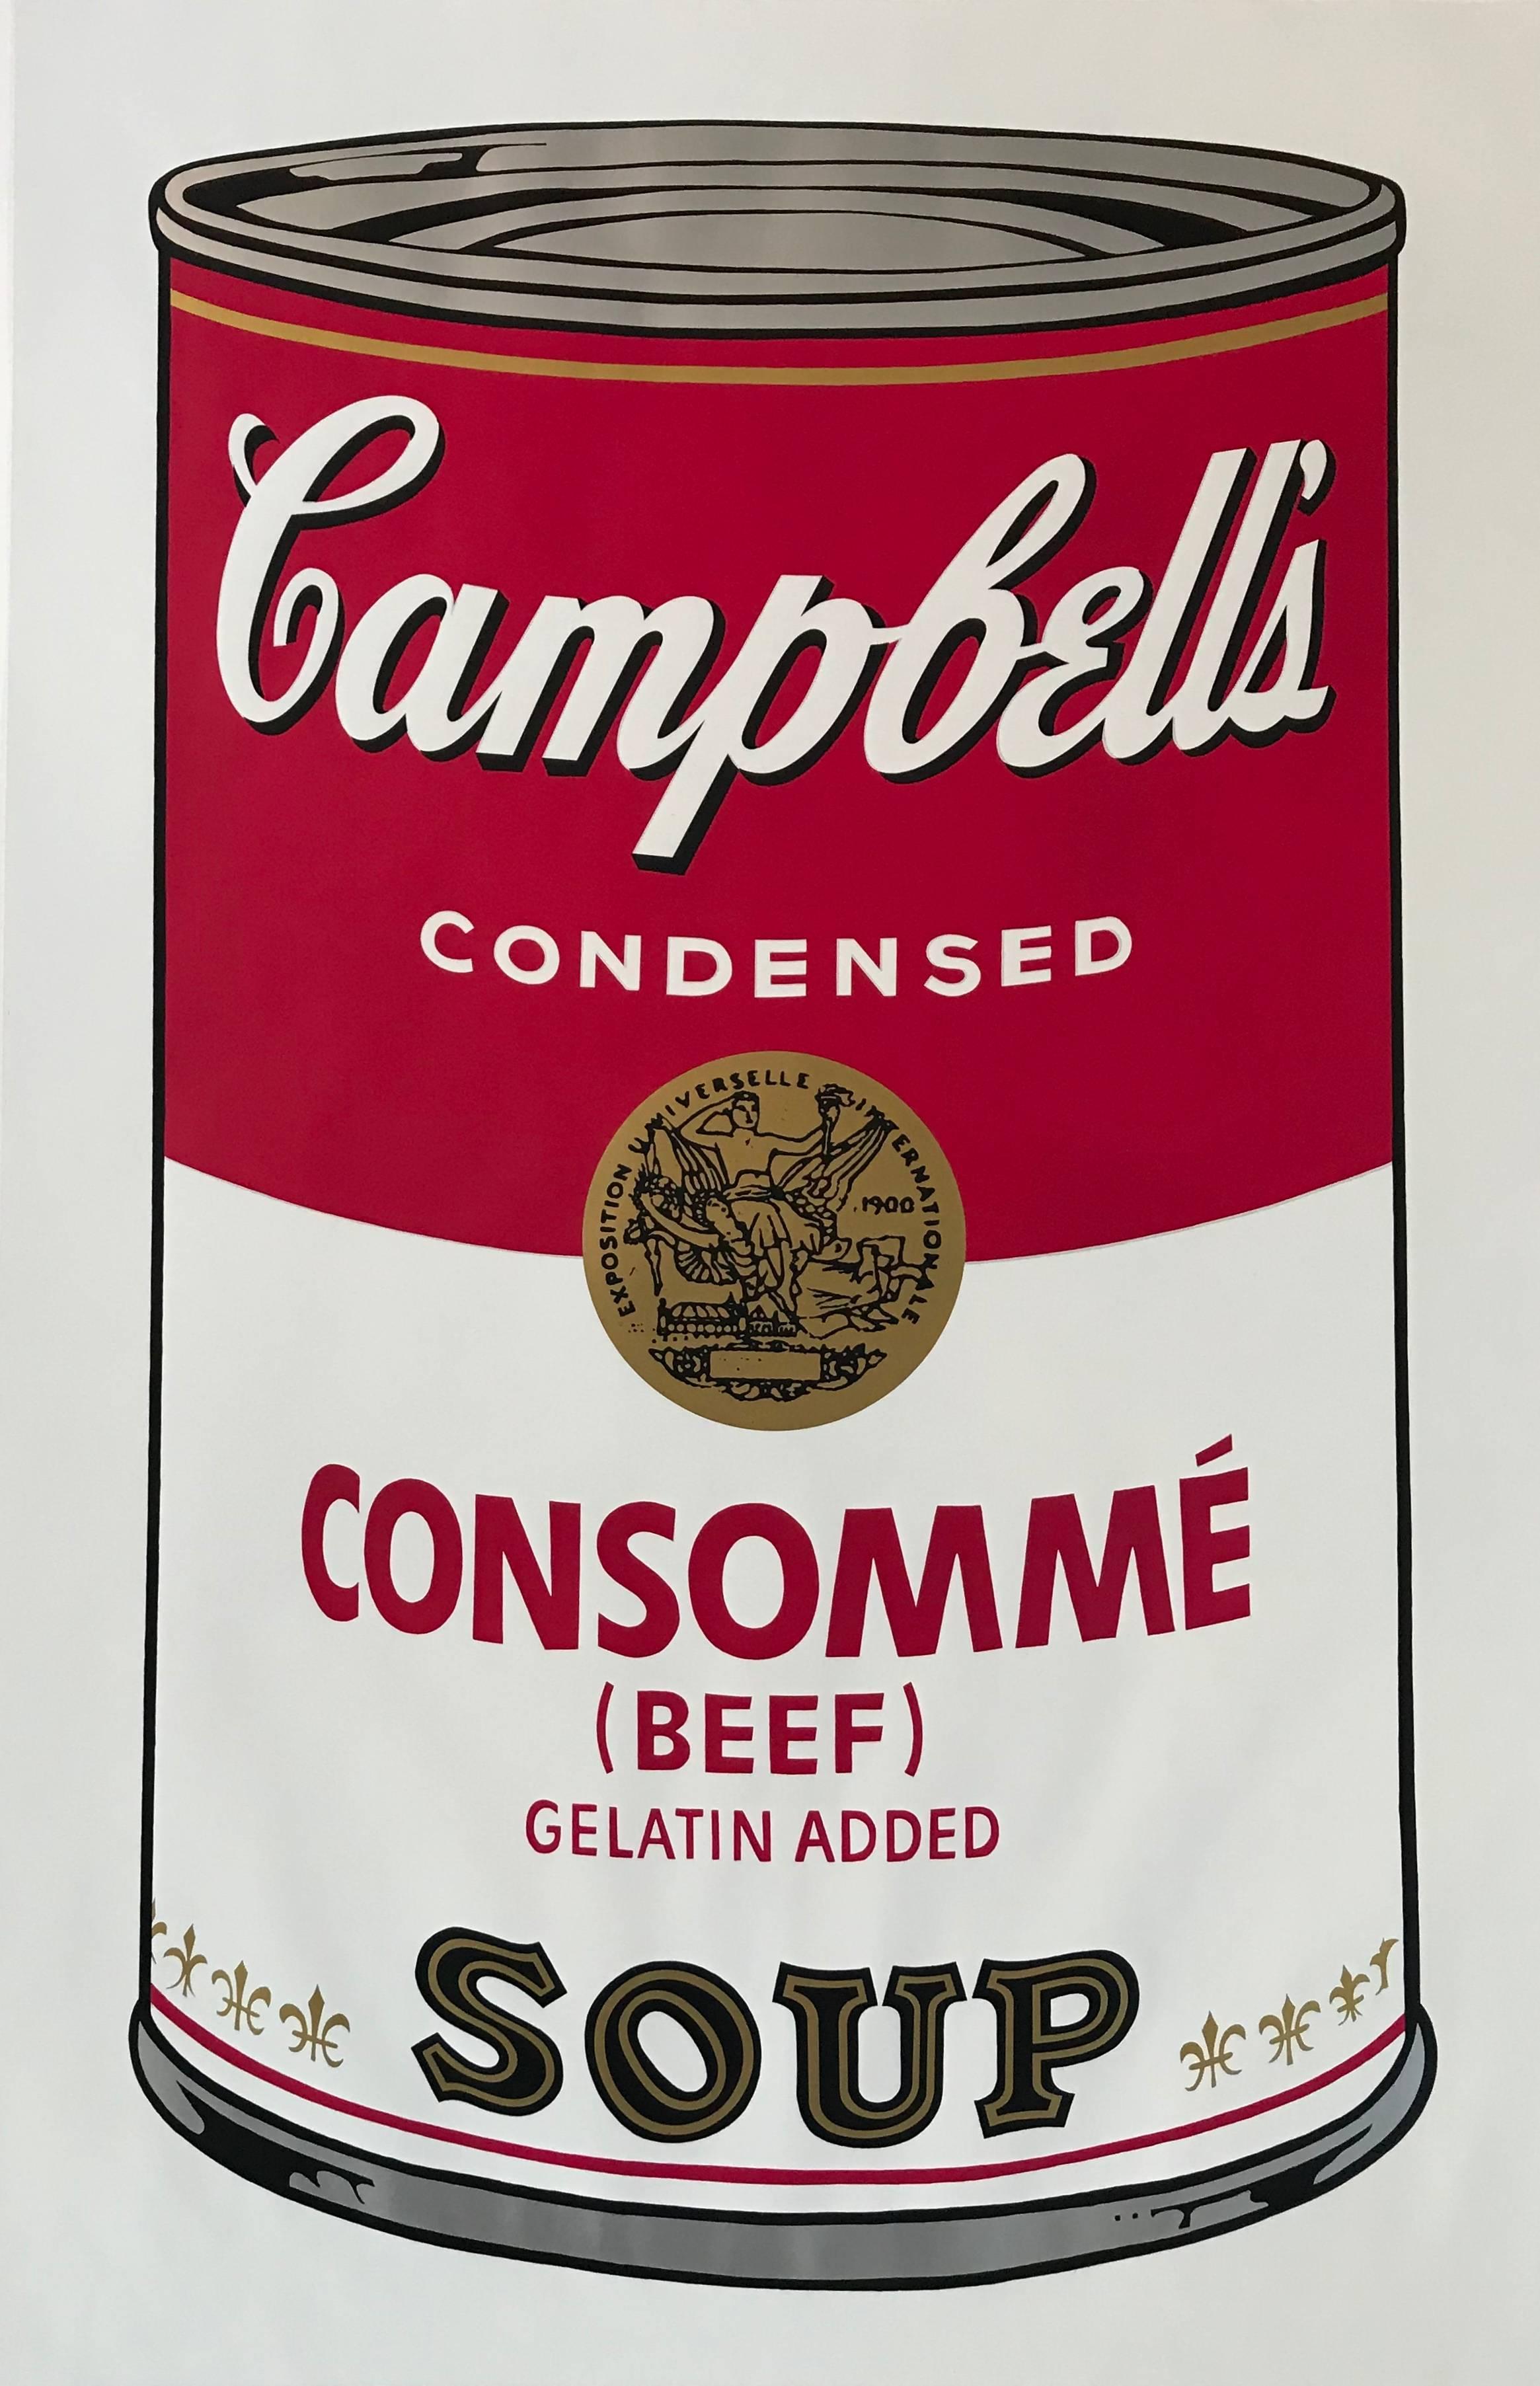 Andy Warhol Print - Campbell's Soup I Consomme (Beef) F&S II.52